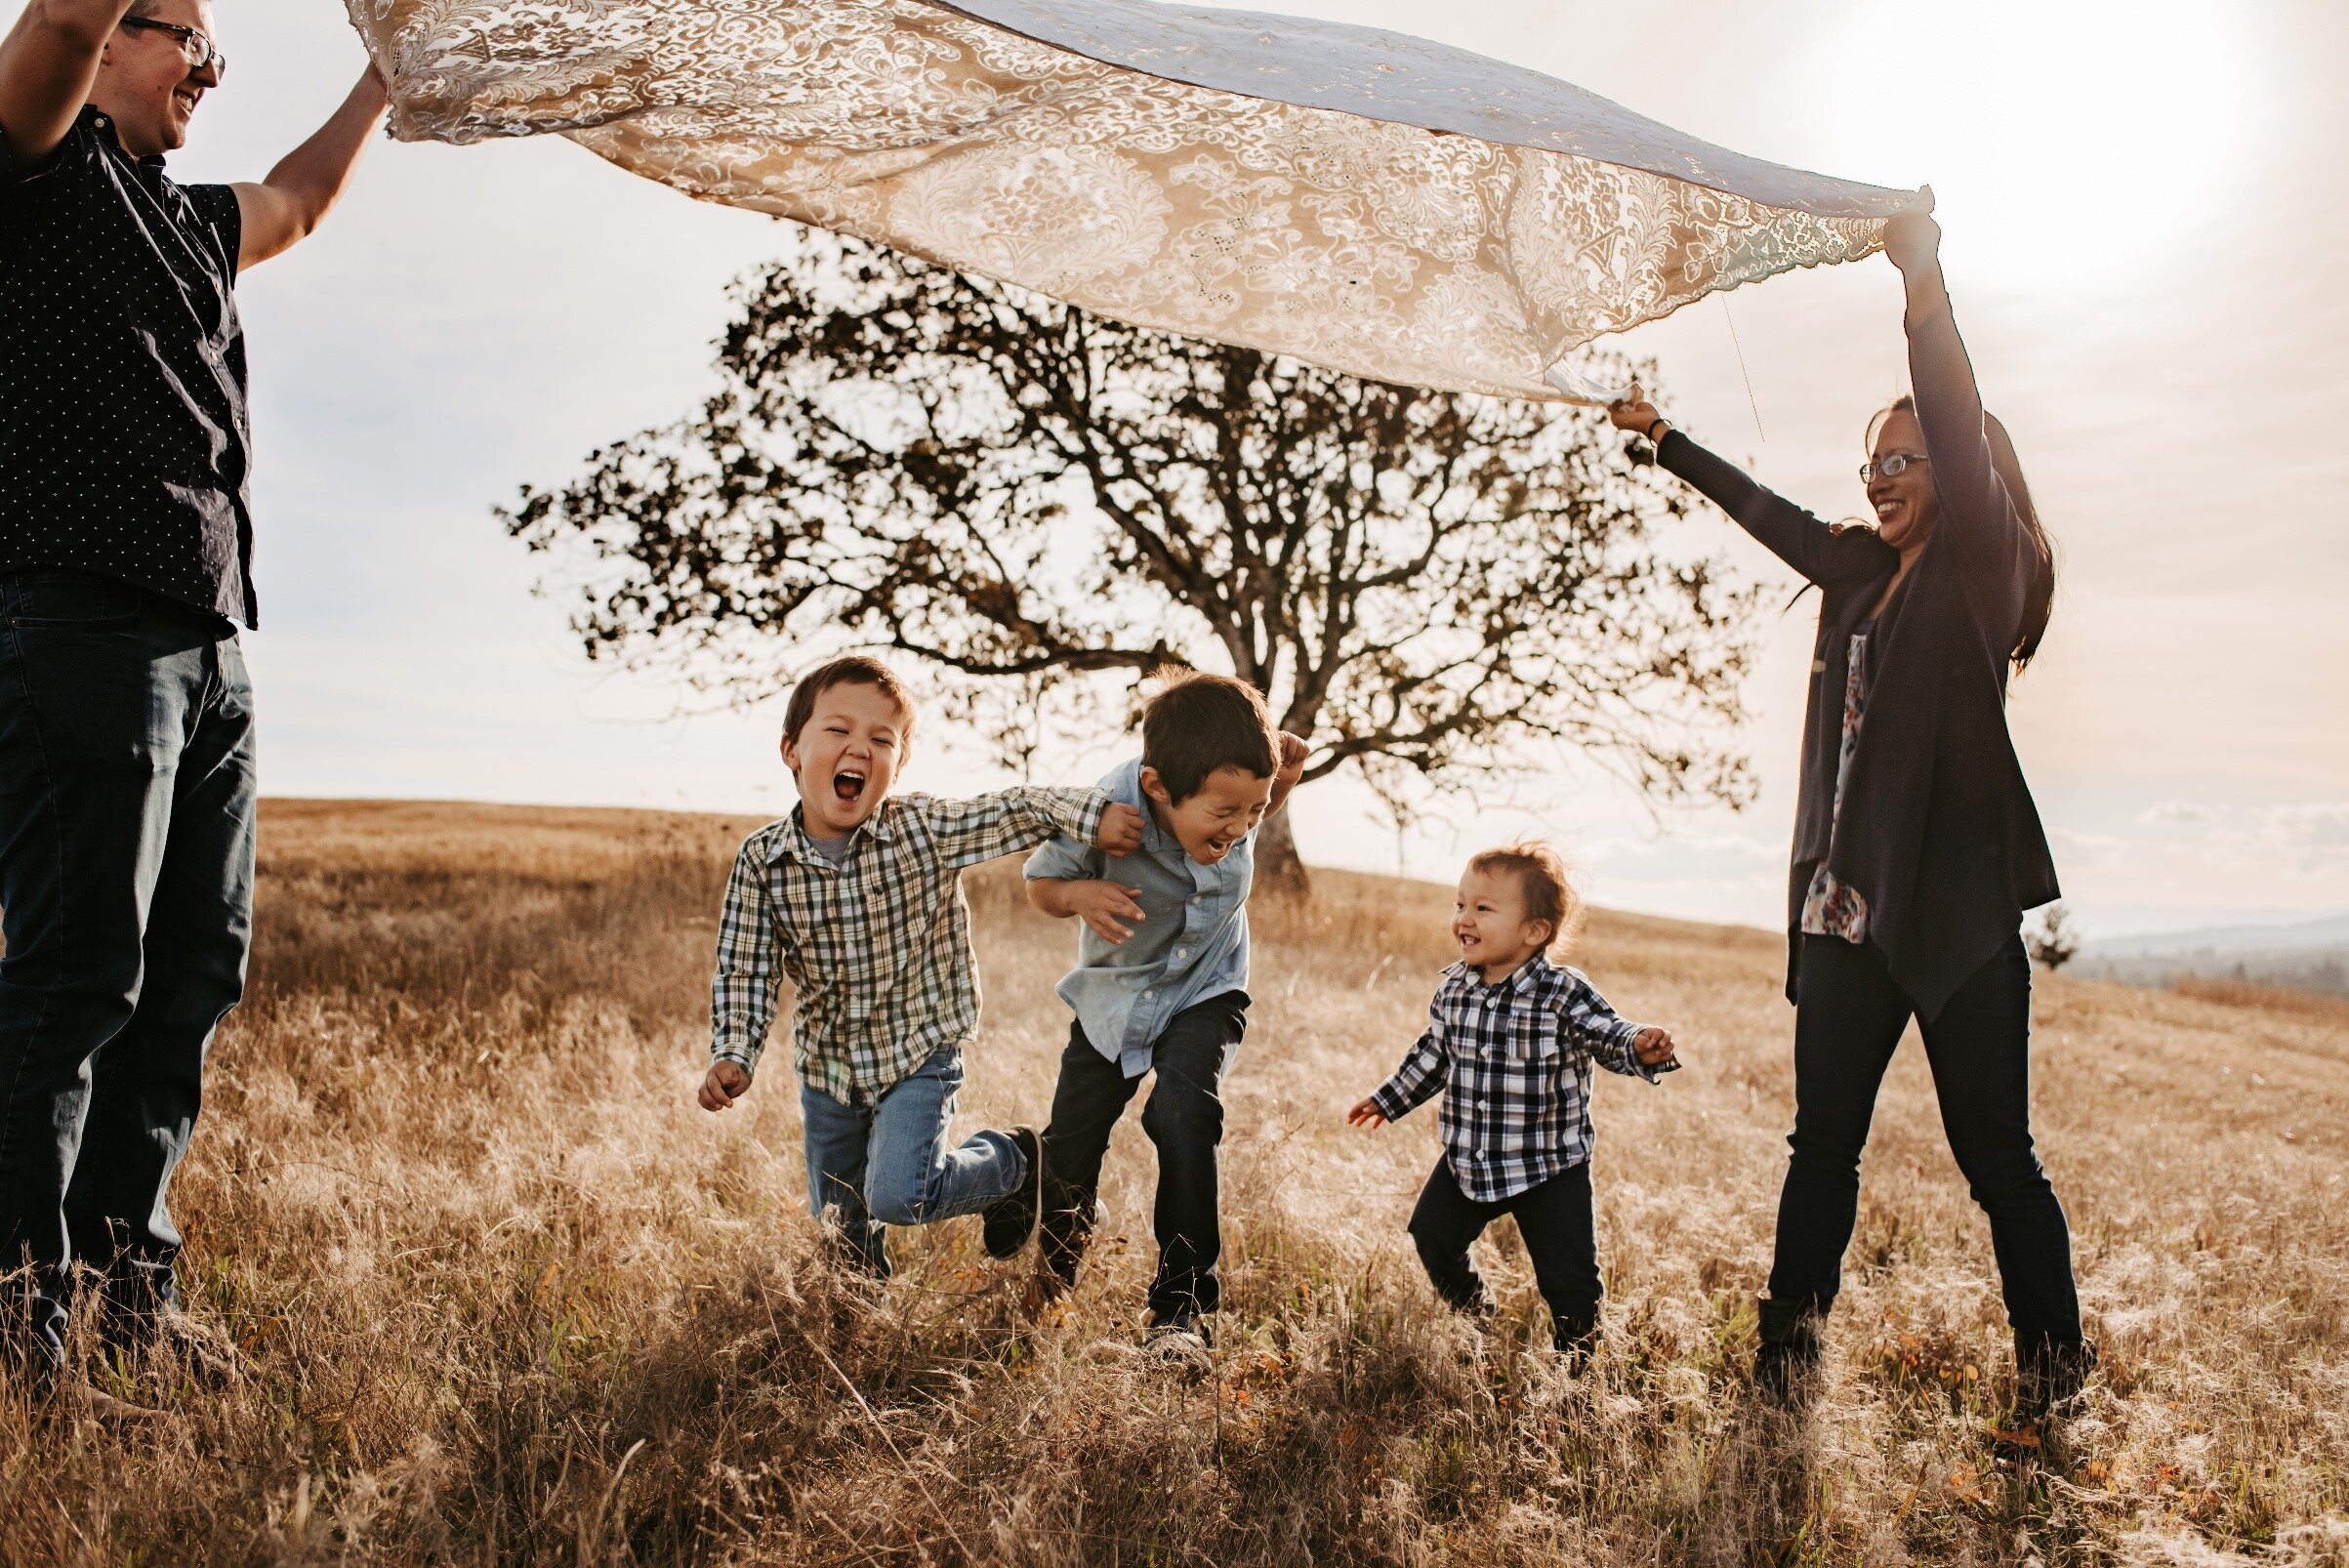 Family photographed holding blanket as kids run under it